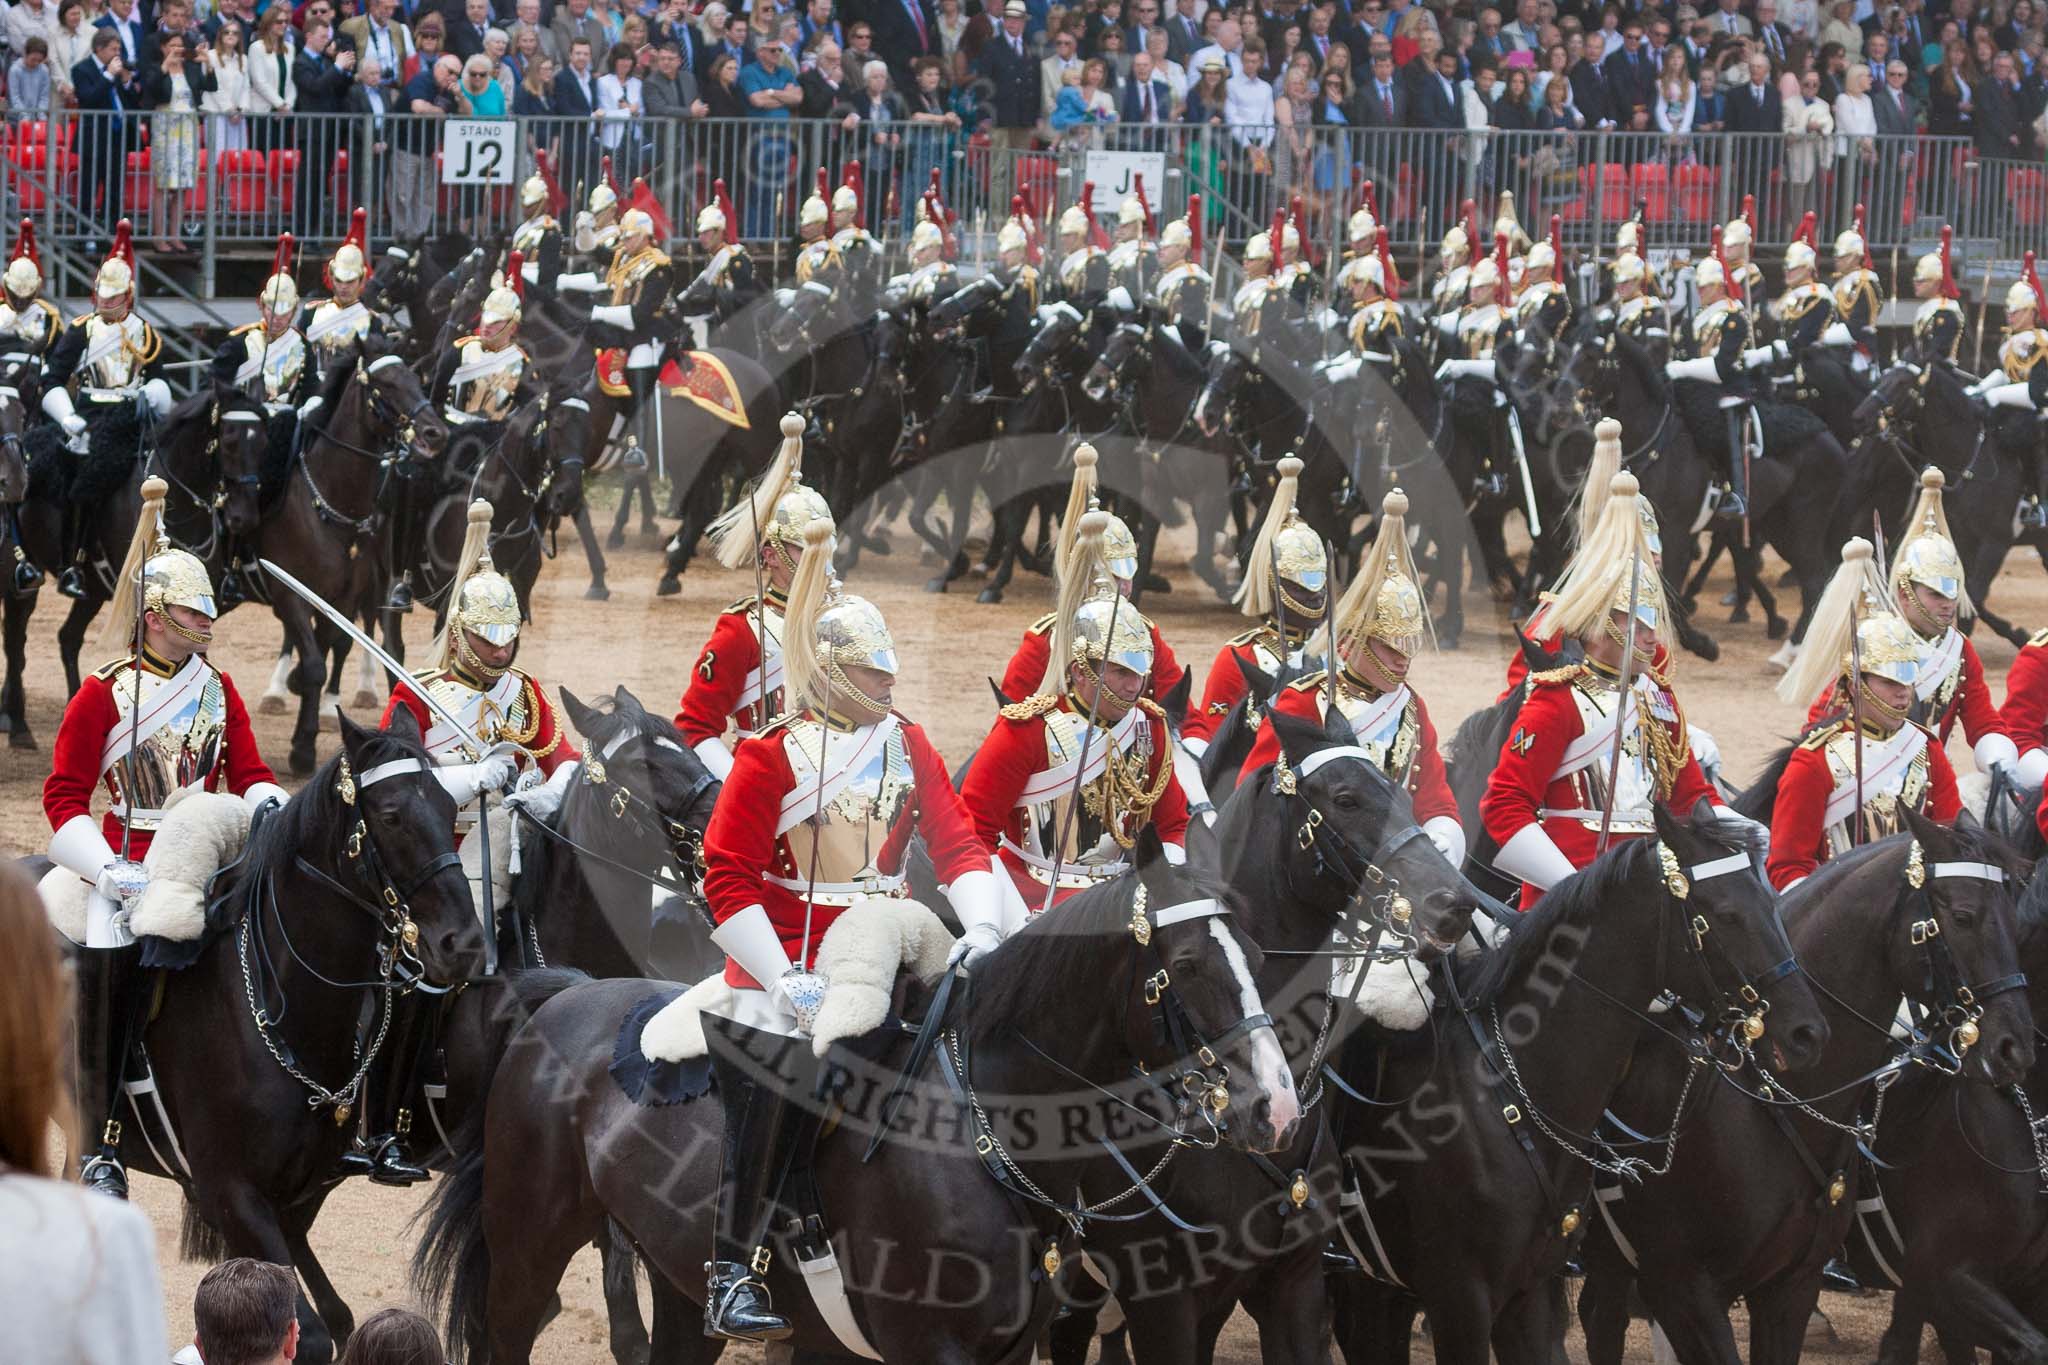 The Colonel's Review 2015.
Horse Guards Parade, Westminster,
London,

United Kingdom,
on 06 June 2015 at 11:57, image #528